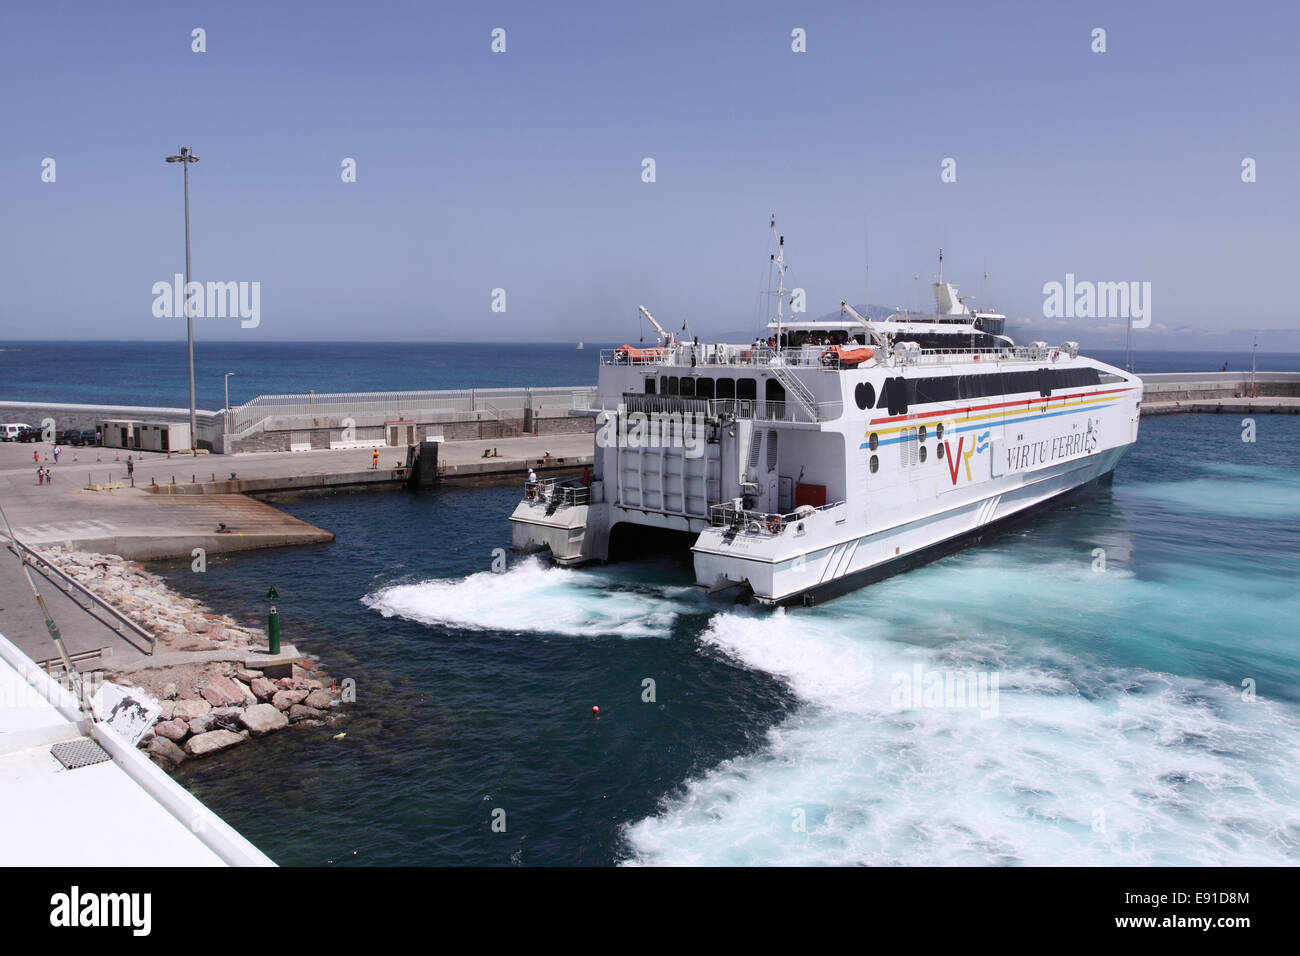 Tarifa Spain a Virtu Ferries ferry boat arrives in Tarifa port on a service from Tangier Morocco Stock Photo